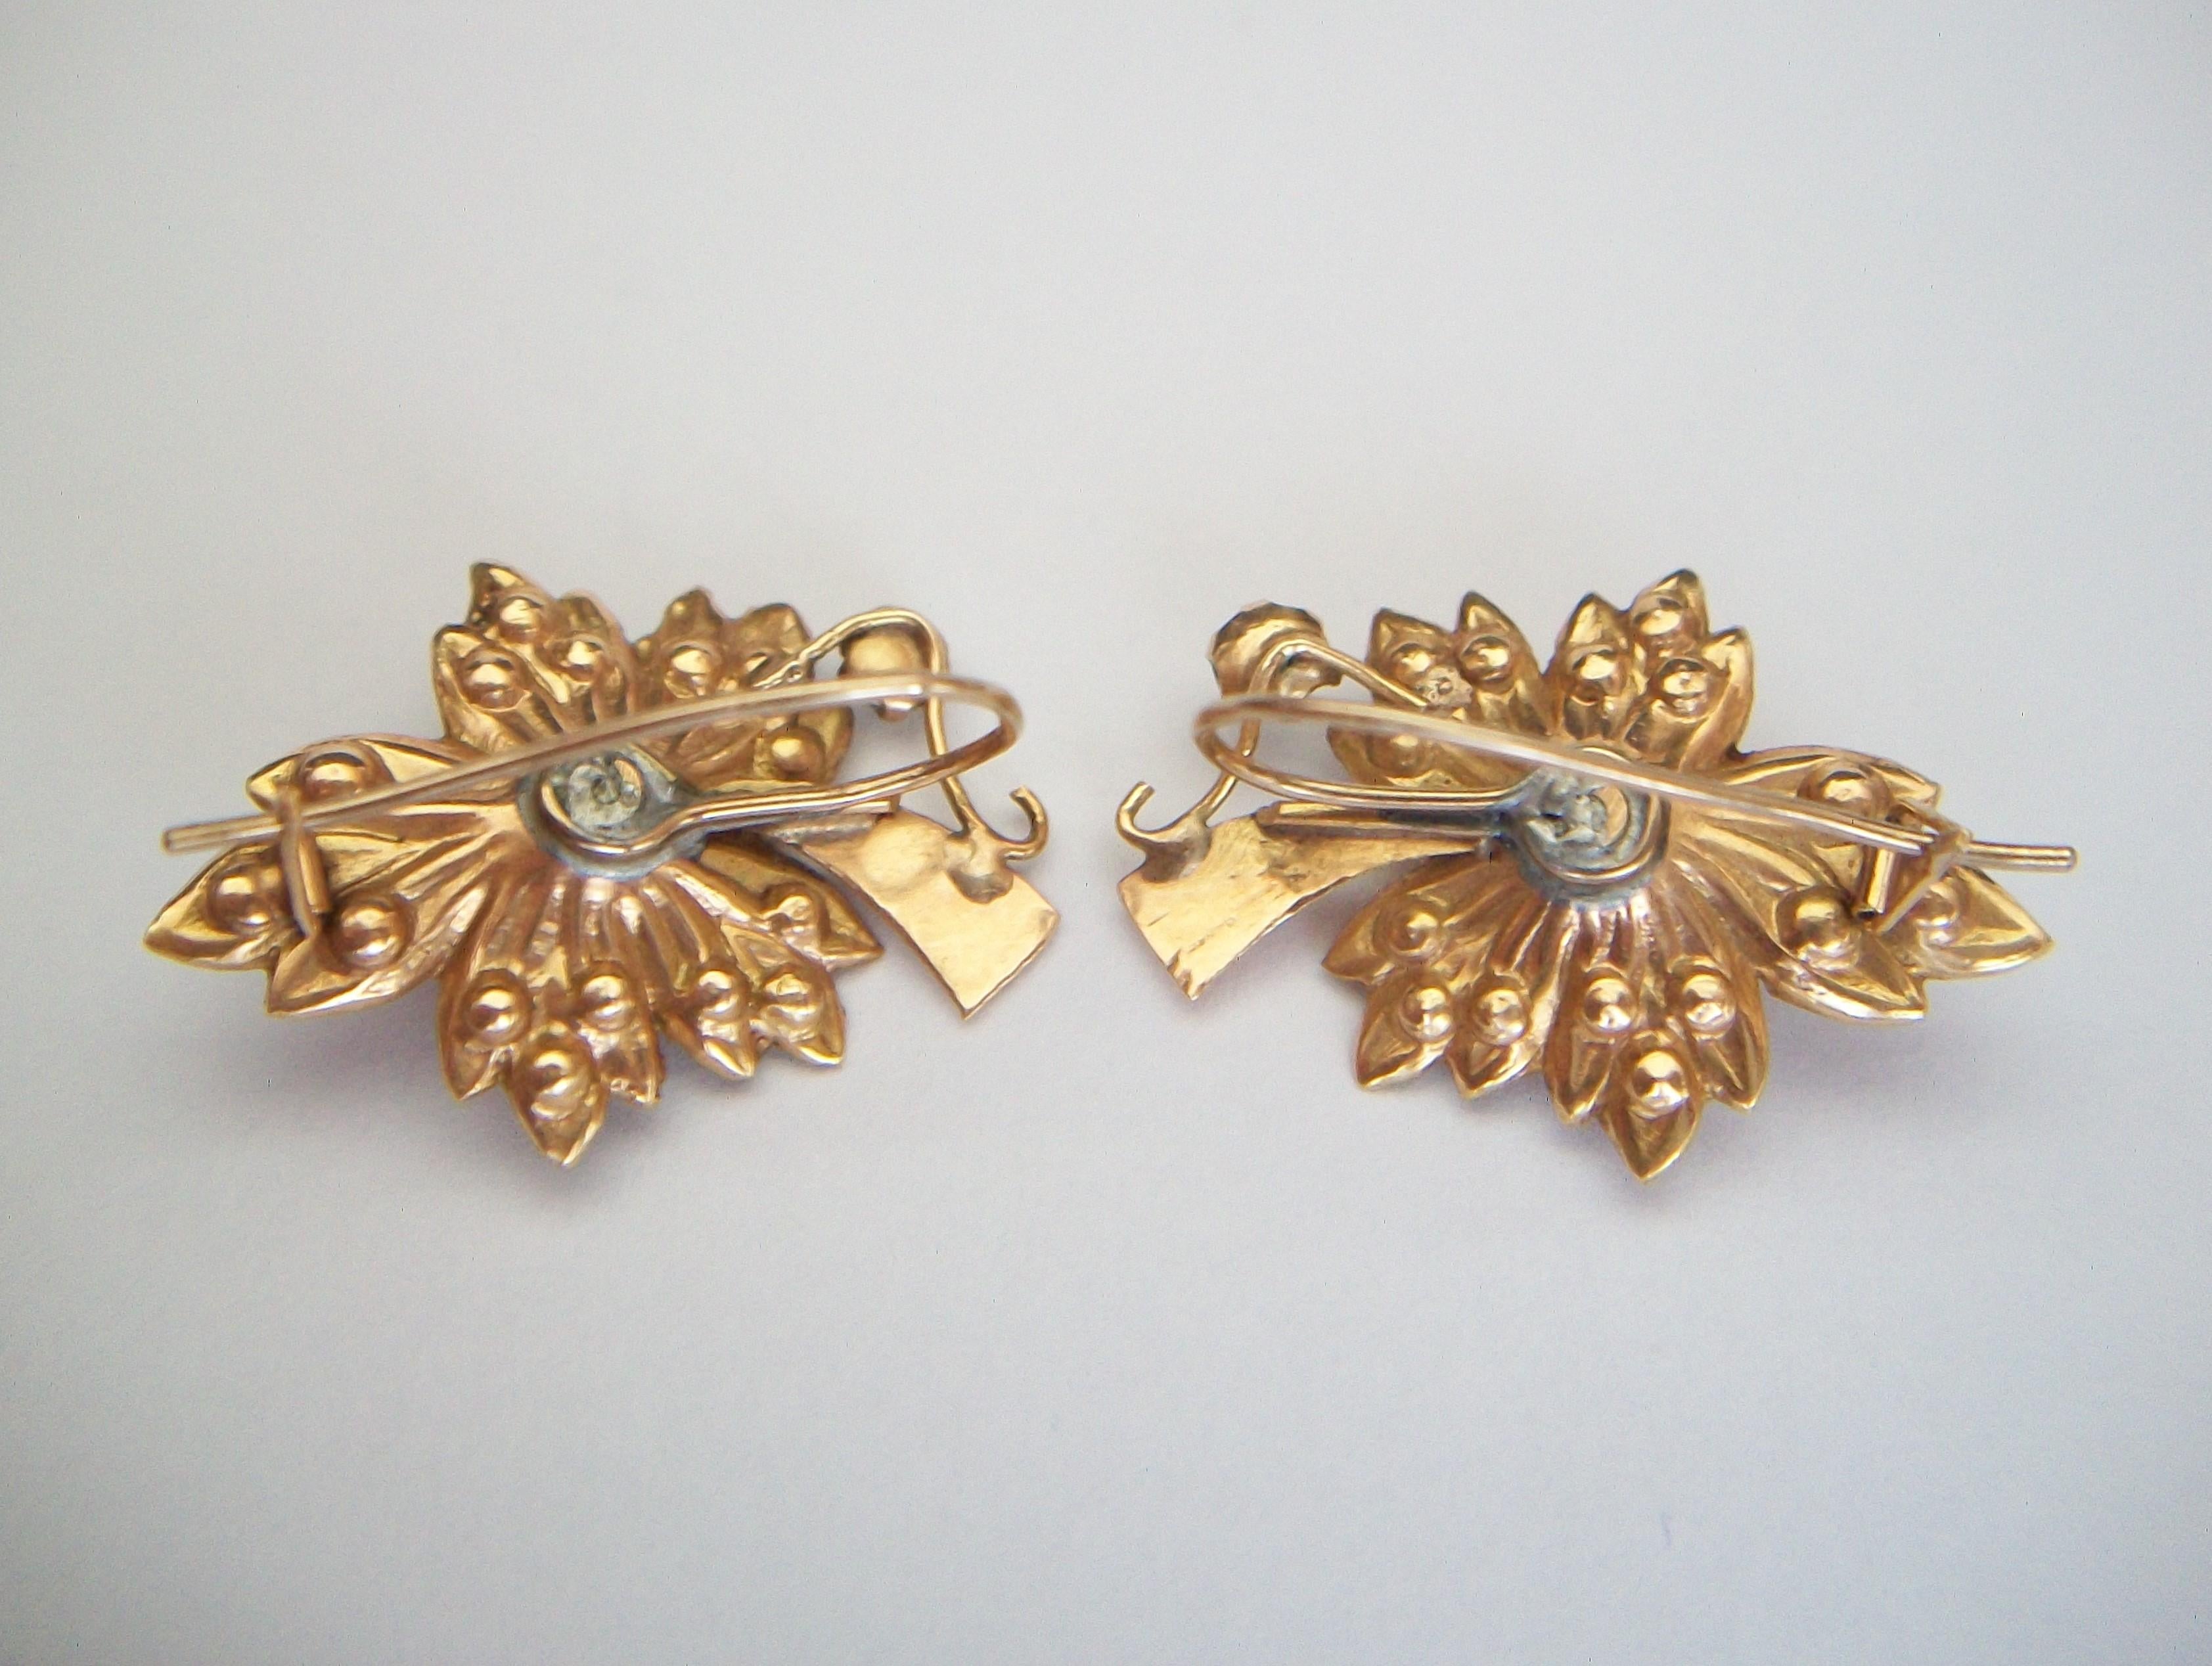 Victorian 14K Gold 'Leaf' Earrings with Seed Pearls & Paste - E.U. - Circa 1880 For Sale 1